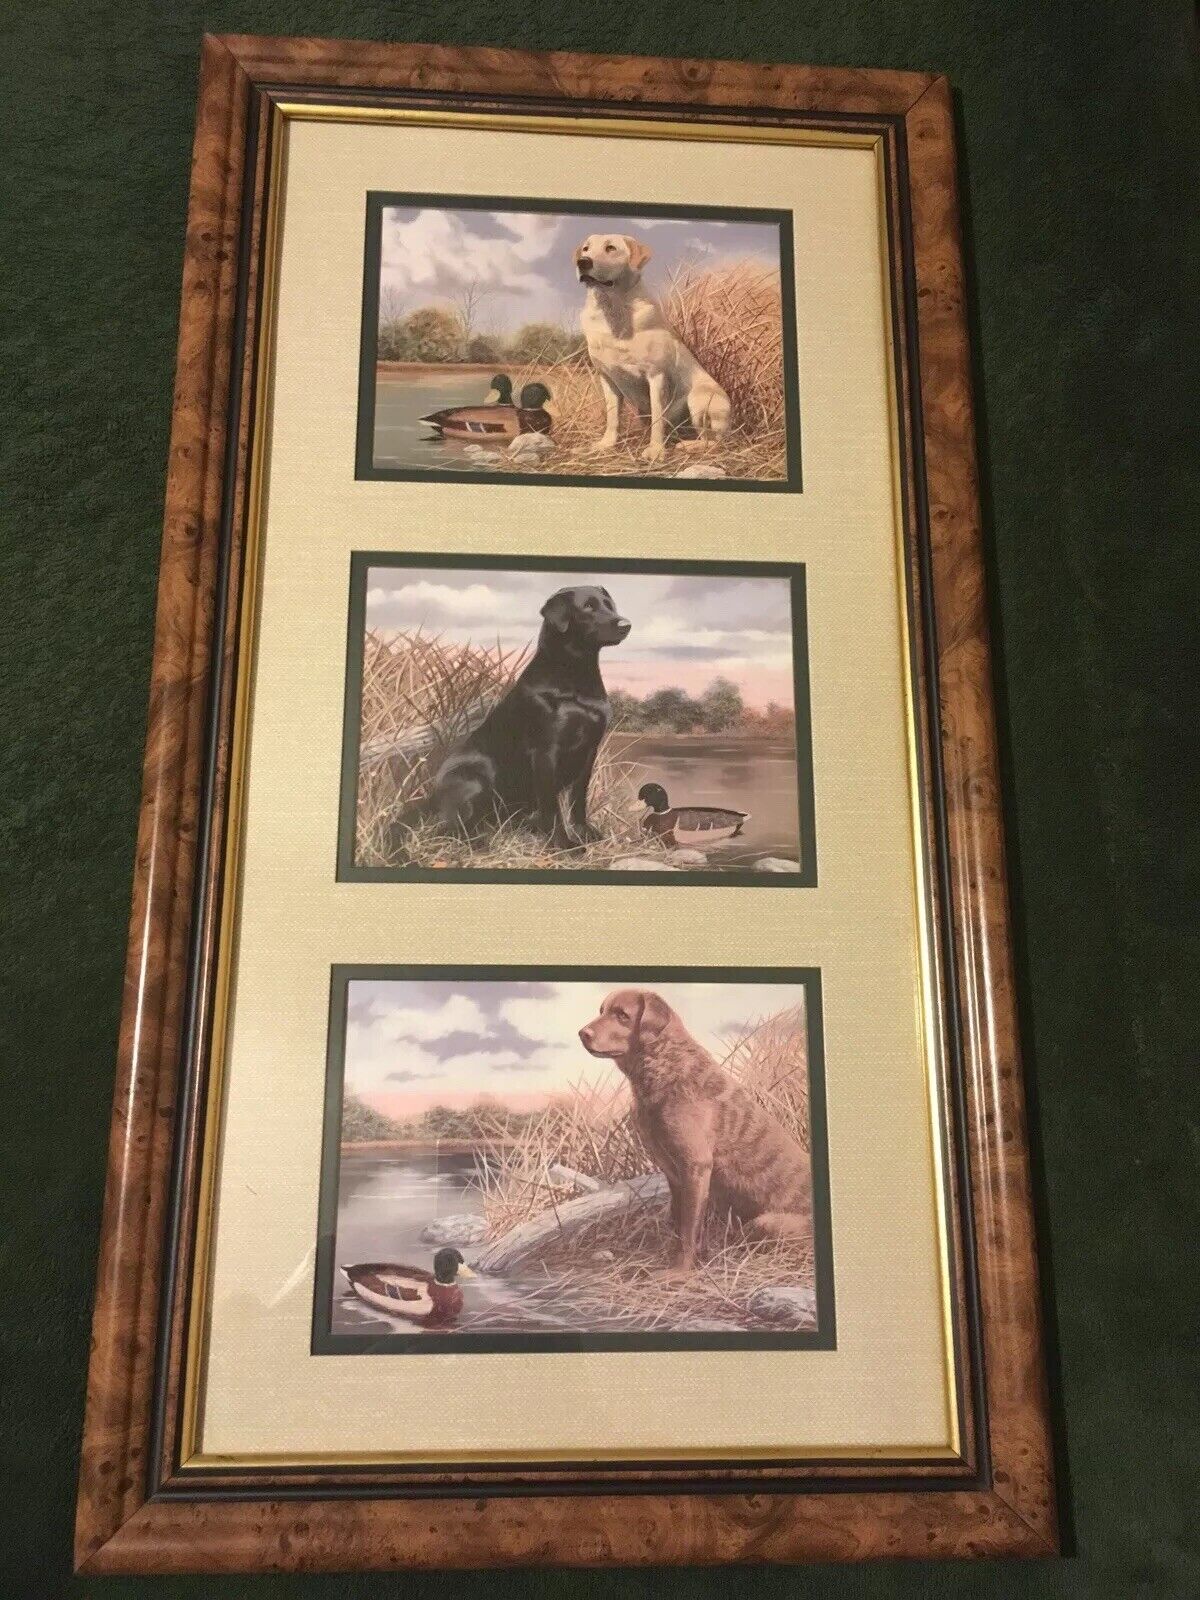 Black Lab, Yello Lab, Chocolate Lab, dogs duck hunting by Andrew Chapman NICE